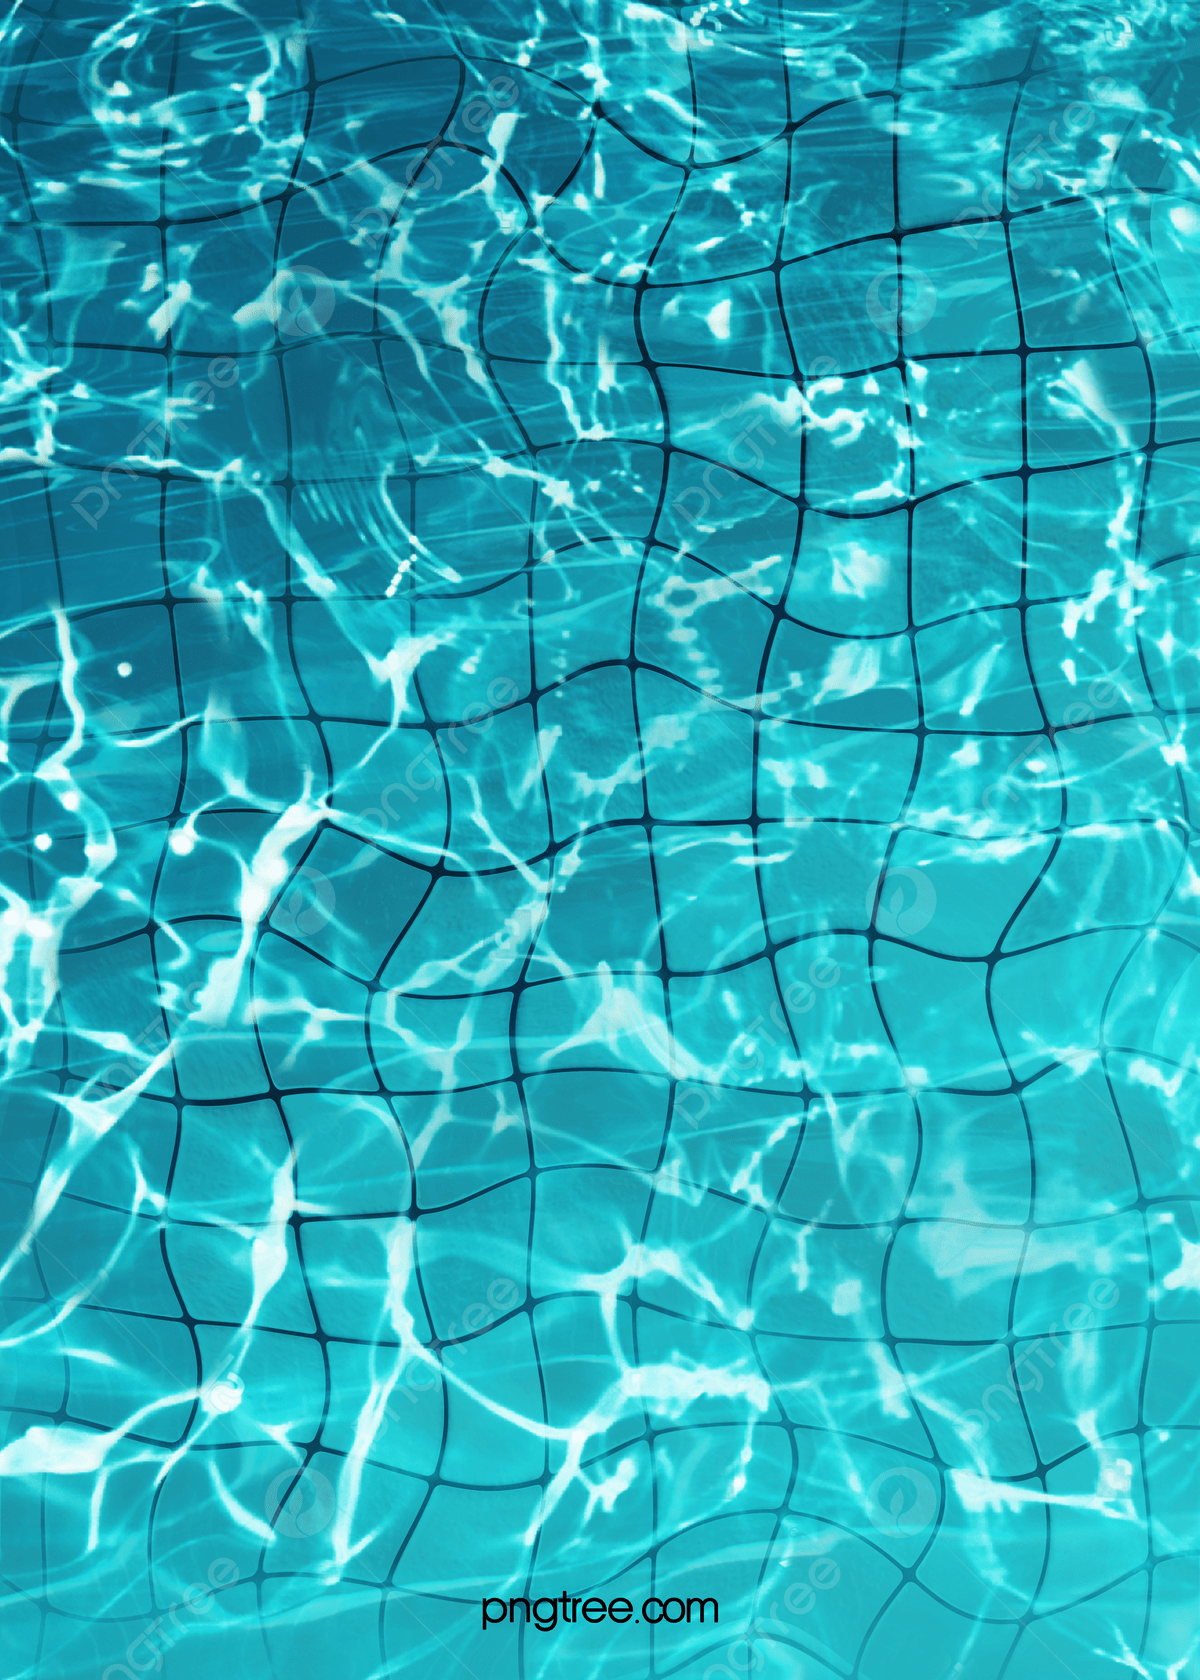 Summer Clear Swimming Pool Background Wallpaper Image For Free Download